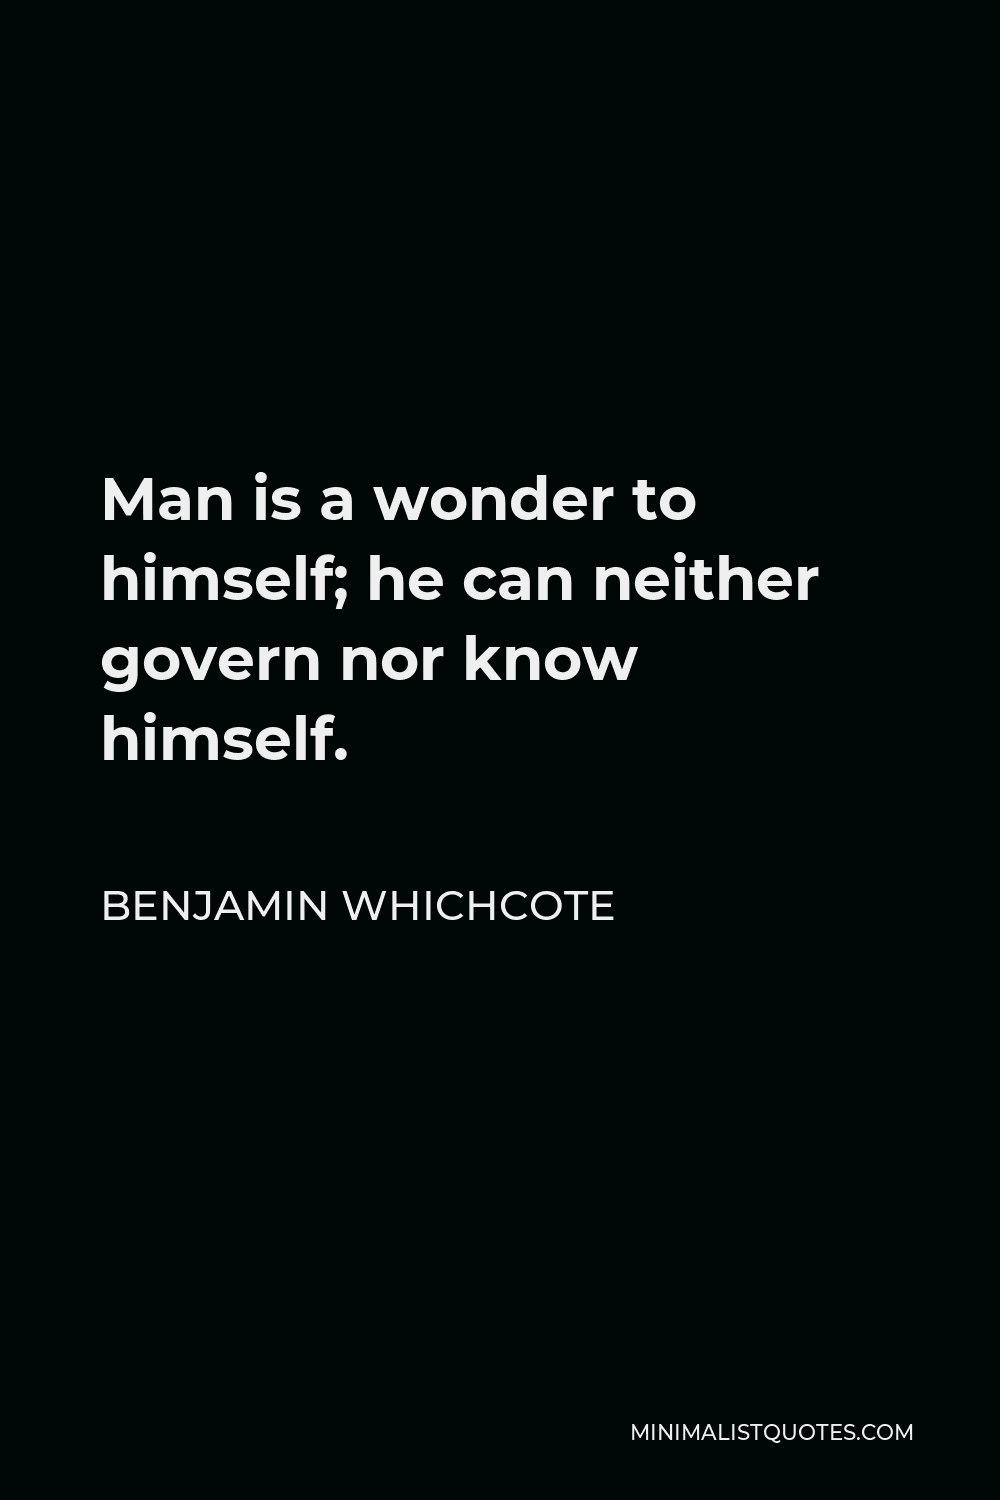 Benjamin Whichcote Quote - Man is a wonder to himself; he can neither govern nor know himself.